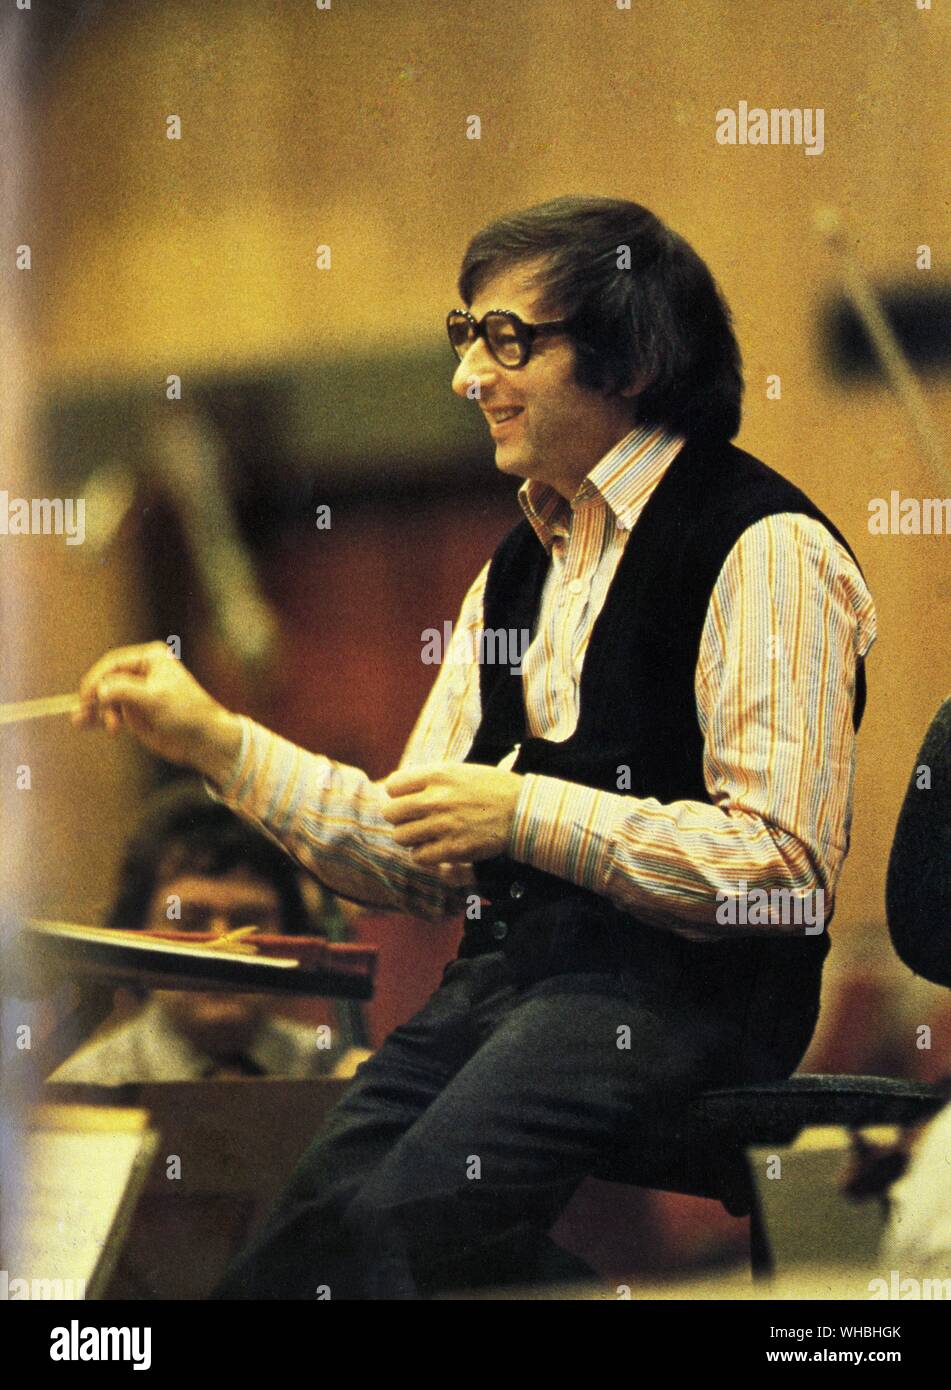 André Previn (Andreas Ludwig Priwin) KBE (b. April 6, 1929, Berlin) is a German-born American Academy Award and Grammy Award winning pianist, conductor, and composer. He first came to prominence by arranging and composing Hollywood film scores in 1948.. Stock Photo